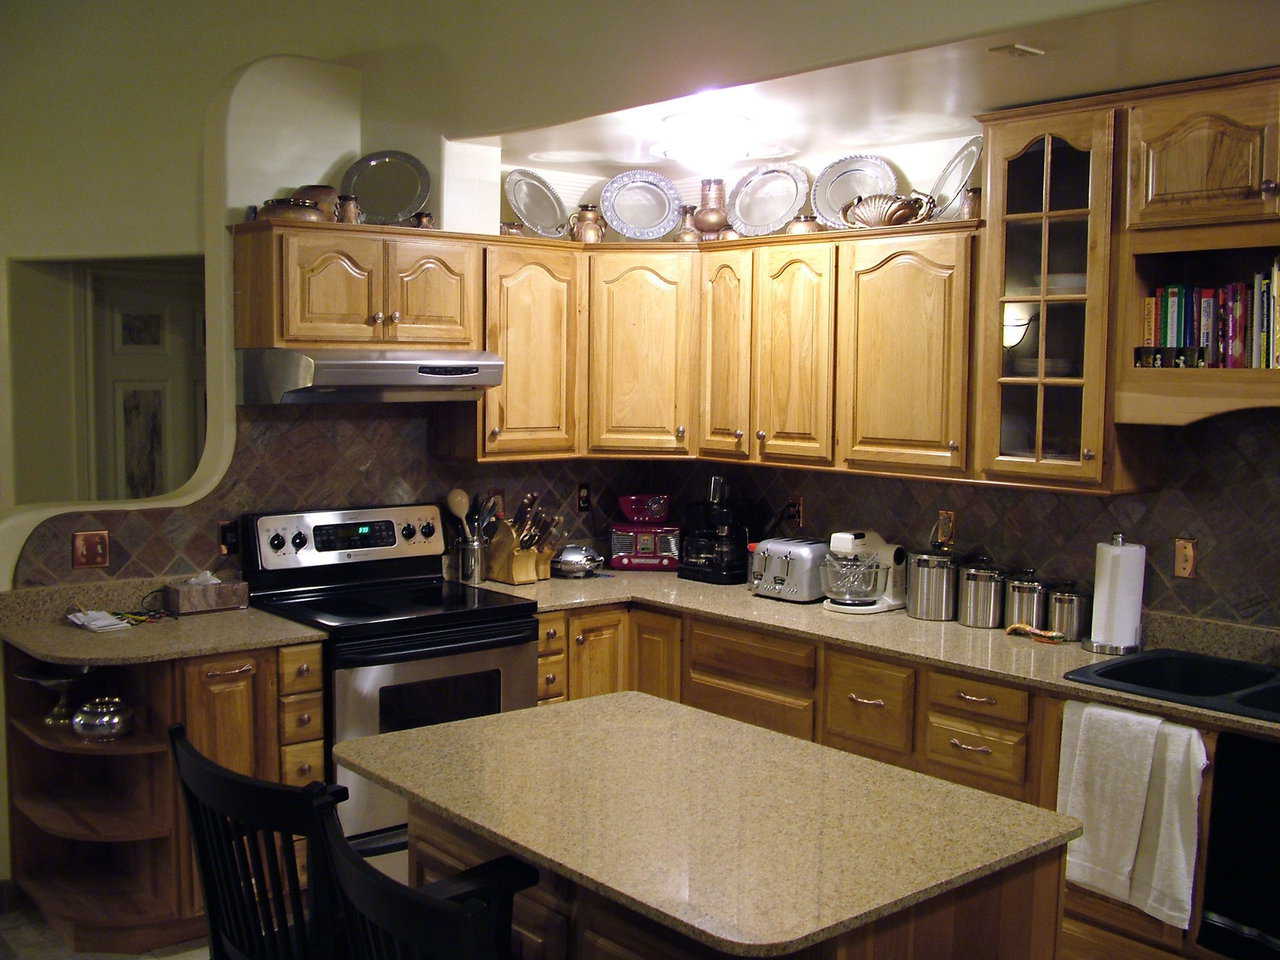 Comfortable work space – Appliances, cupboards and counters in the kitchen are arranged for efficiency and comfort.